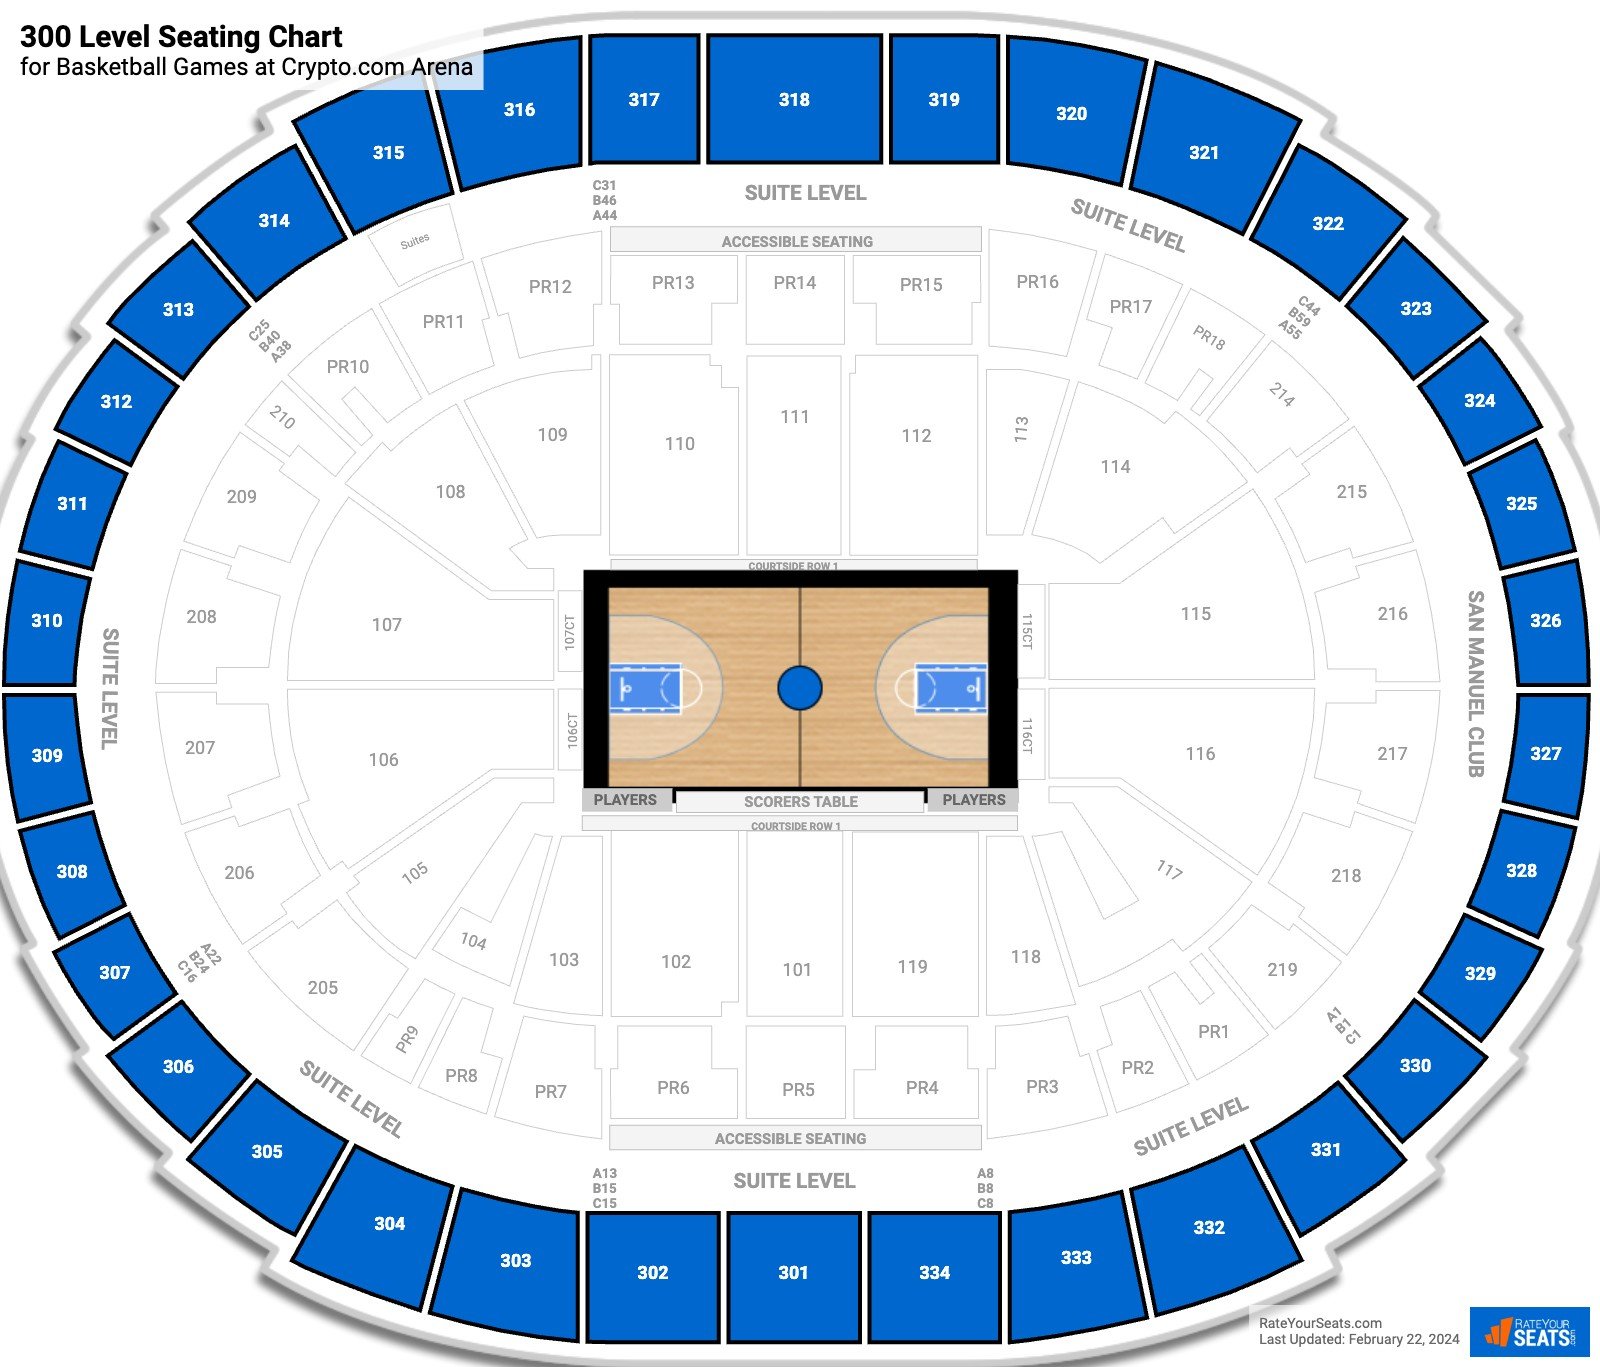 Crypto.com Arena (Formerly Staples Center) Seating Chart + Rows